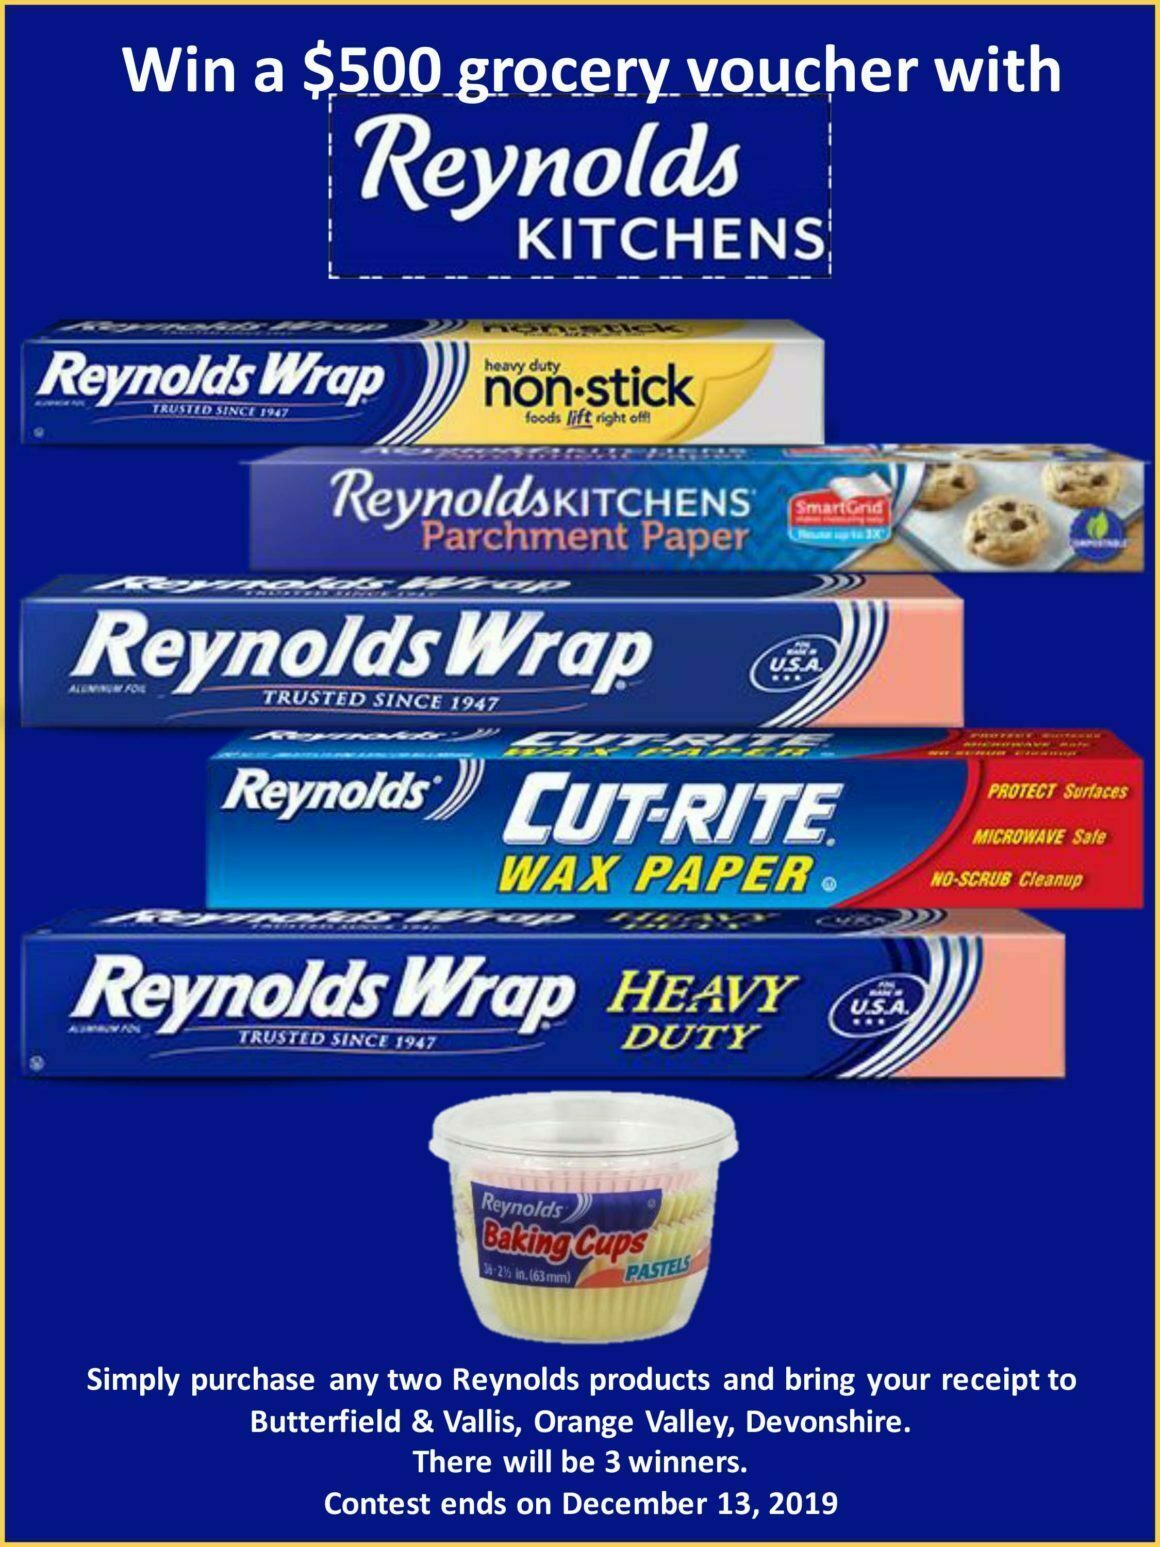 3 LUCKY WINNERS HAVE WON A $500 GROCERY VOUCHER WITH REYNOLDS